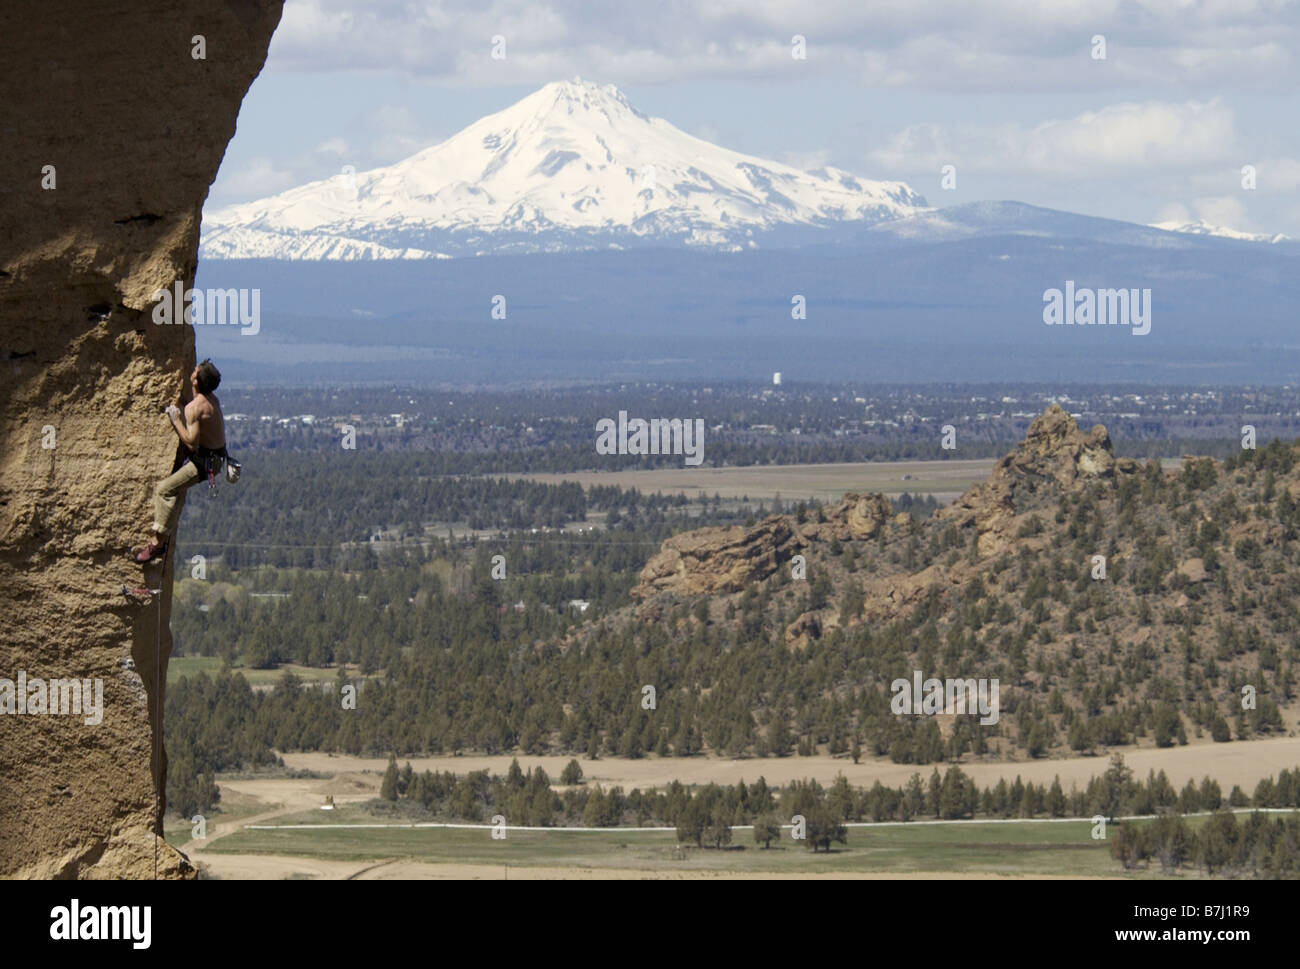 Man (25-30) rock climbing with Mountain in background, Smith Rock State Park, Oregon, USA Stock Photo